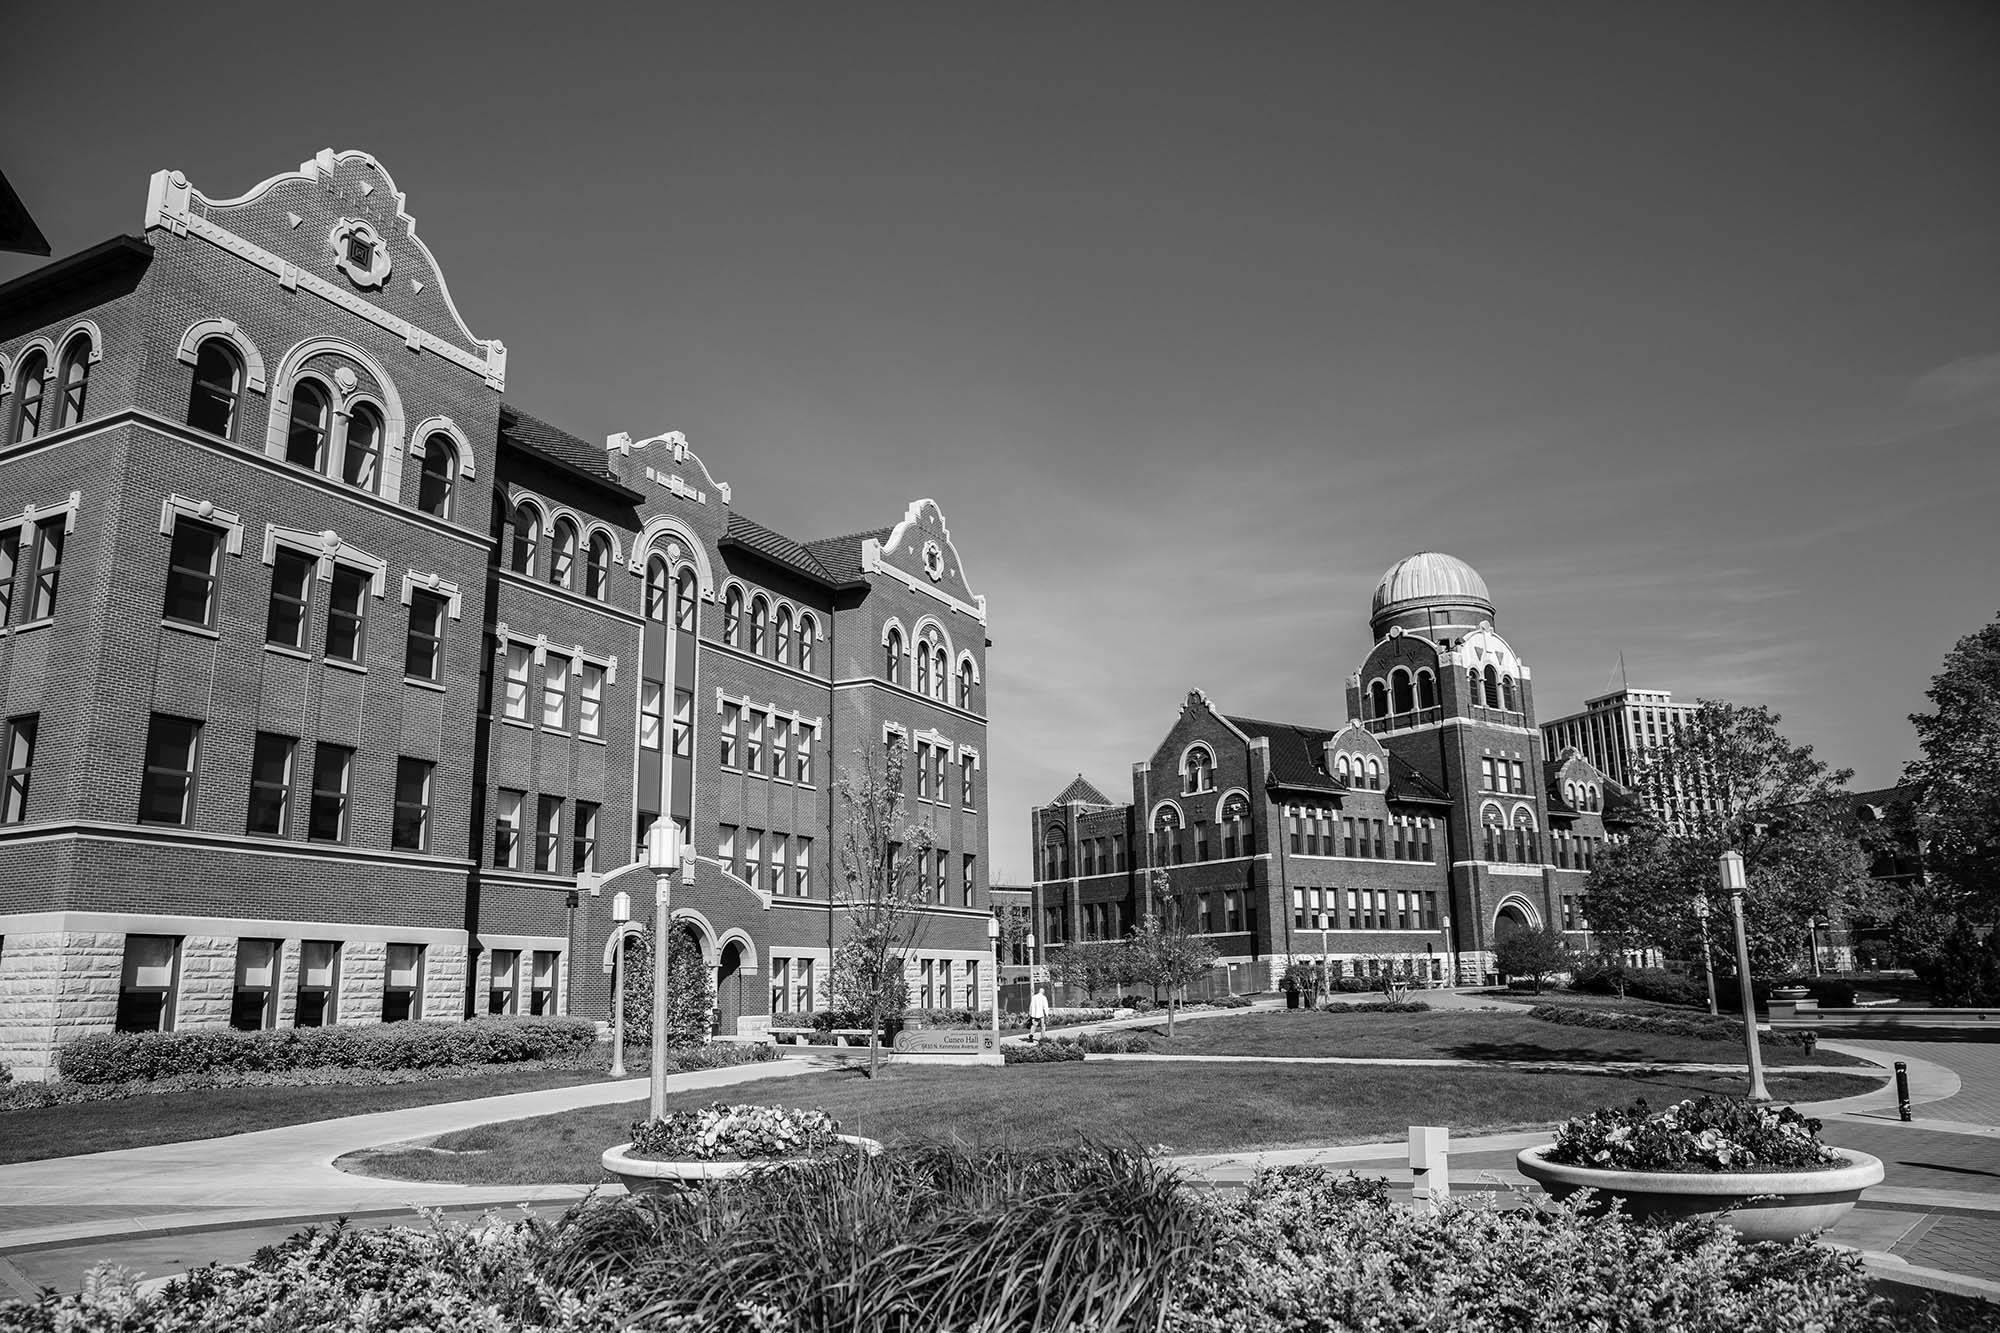 East quad view showing Cuneo Hall to the left of the photograph and Cudahy Science to the right